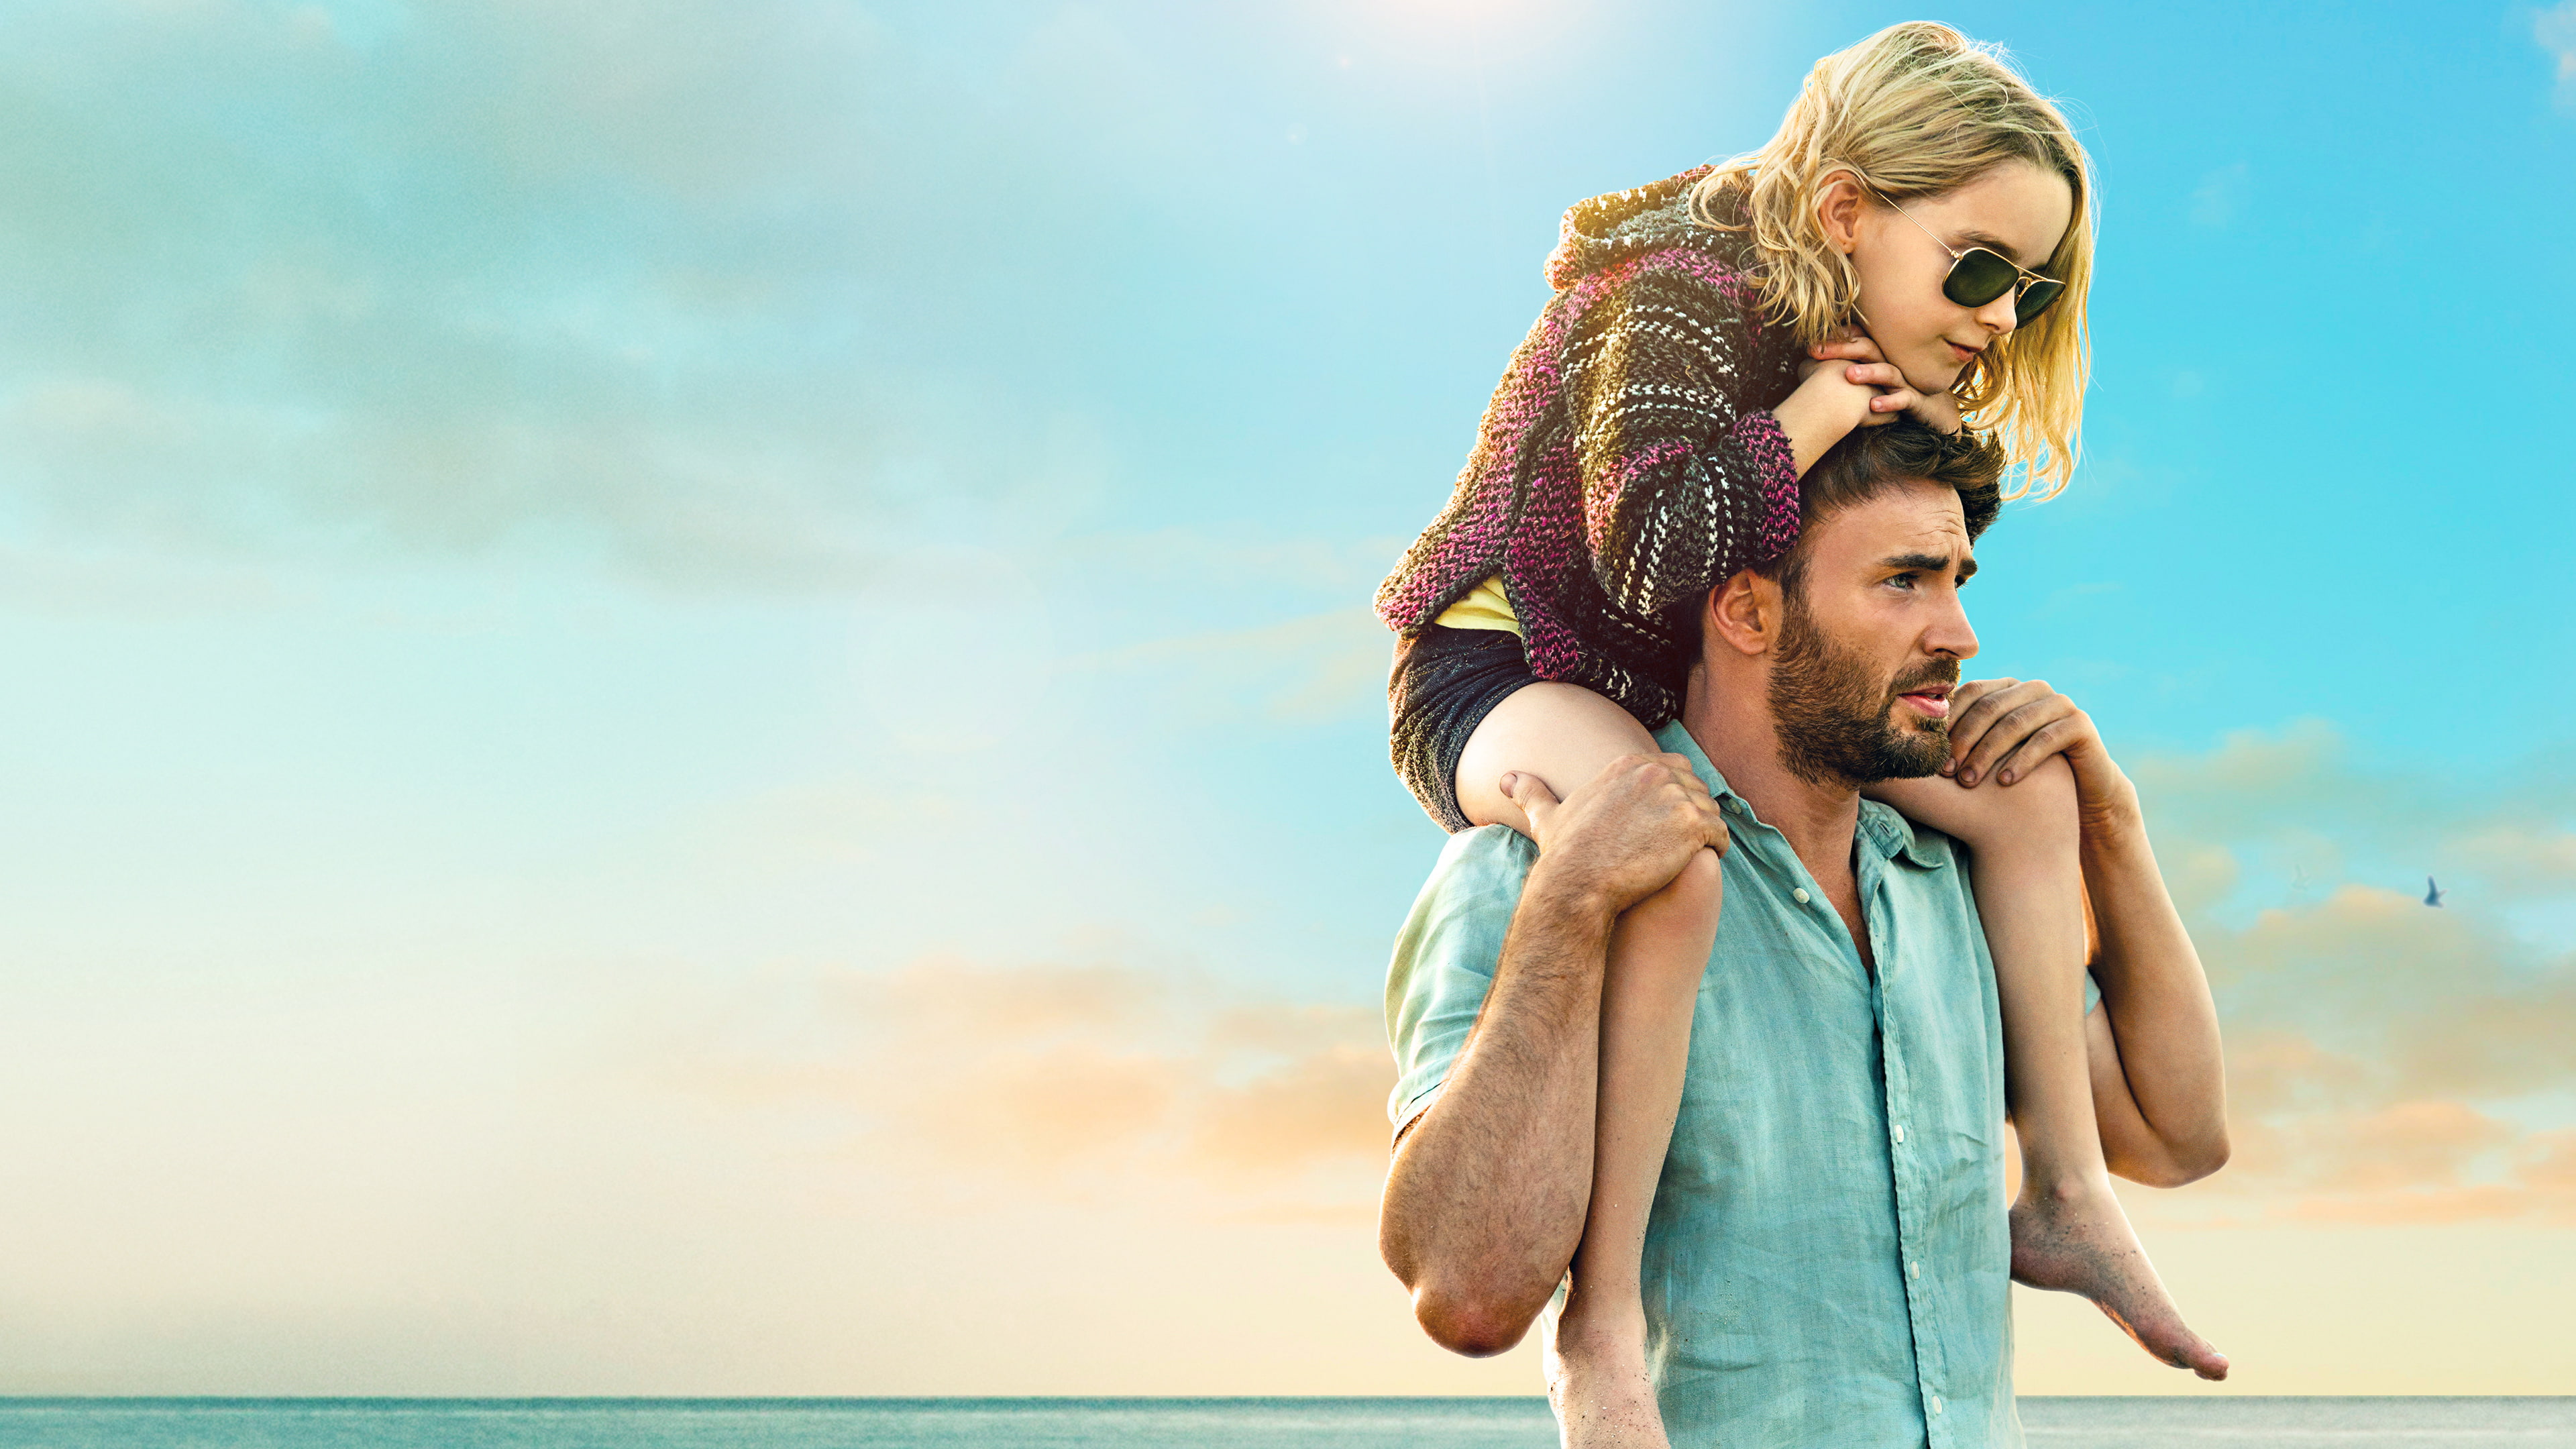 Movie, Gifted, Chris Evans, Gifted (Movie), Mckenna Grace